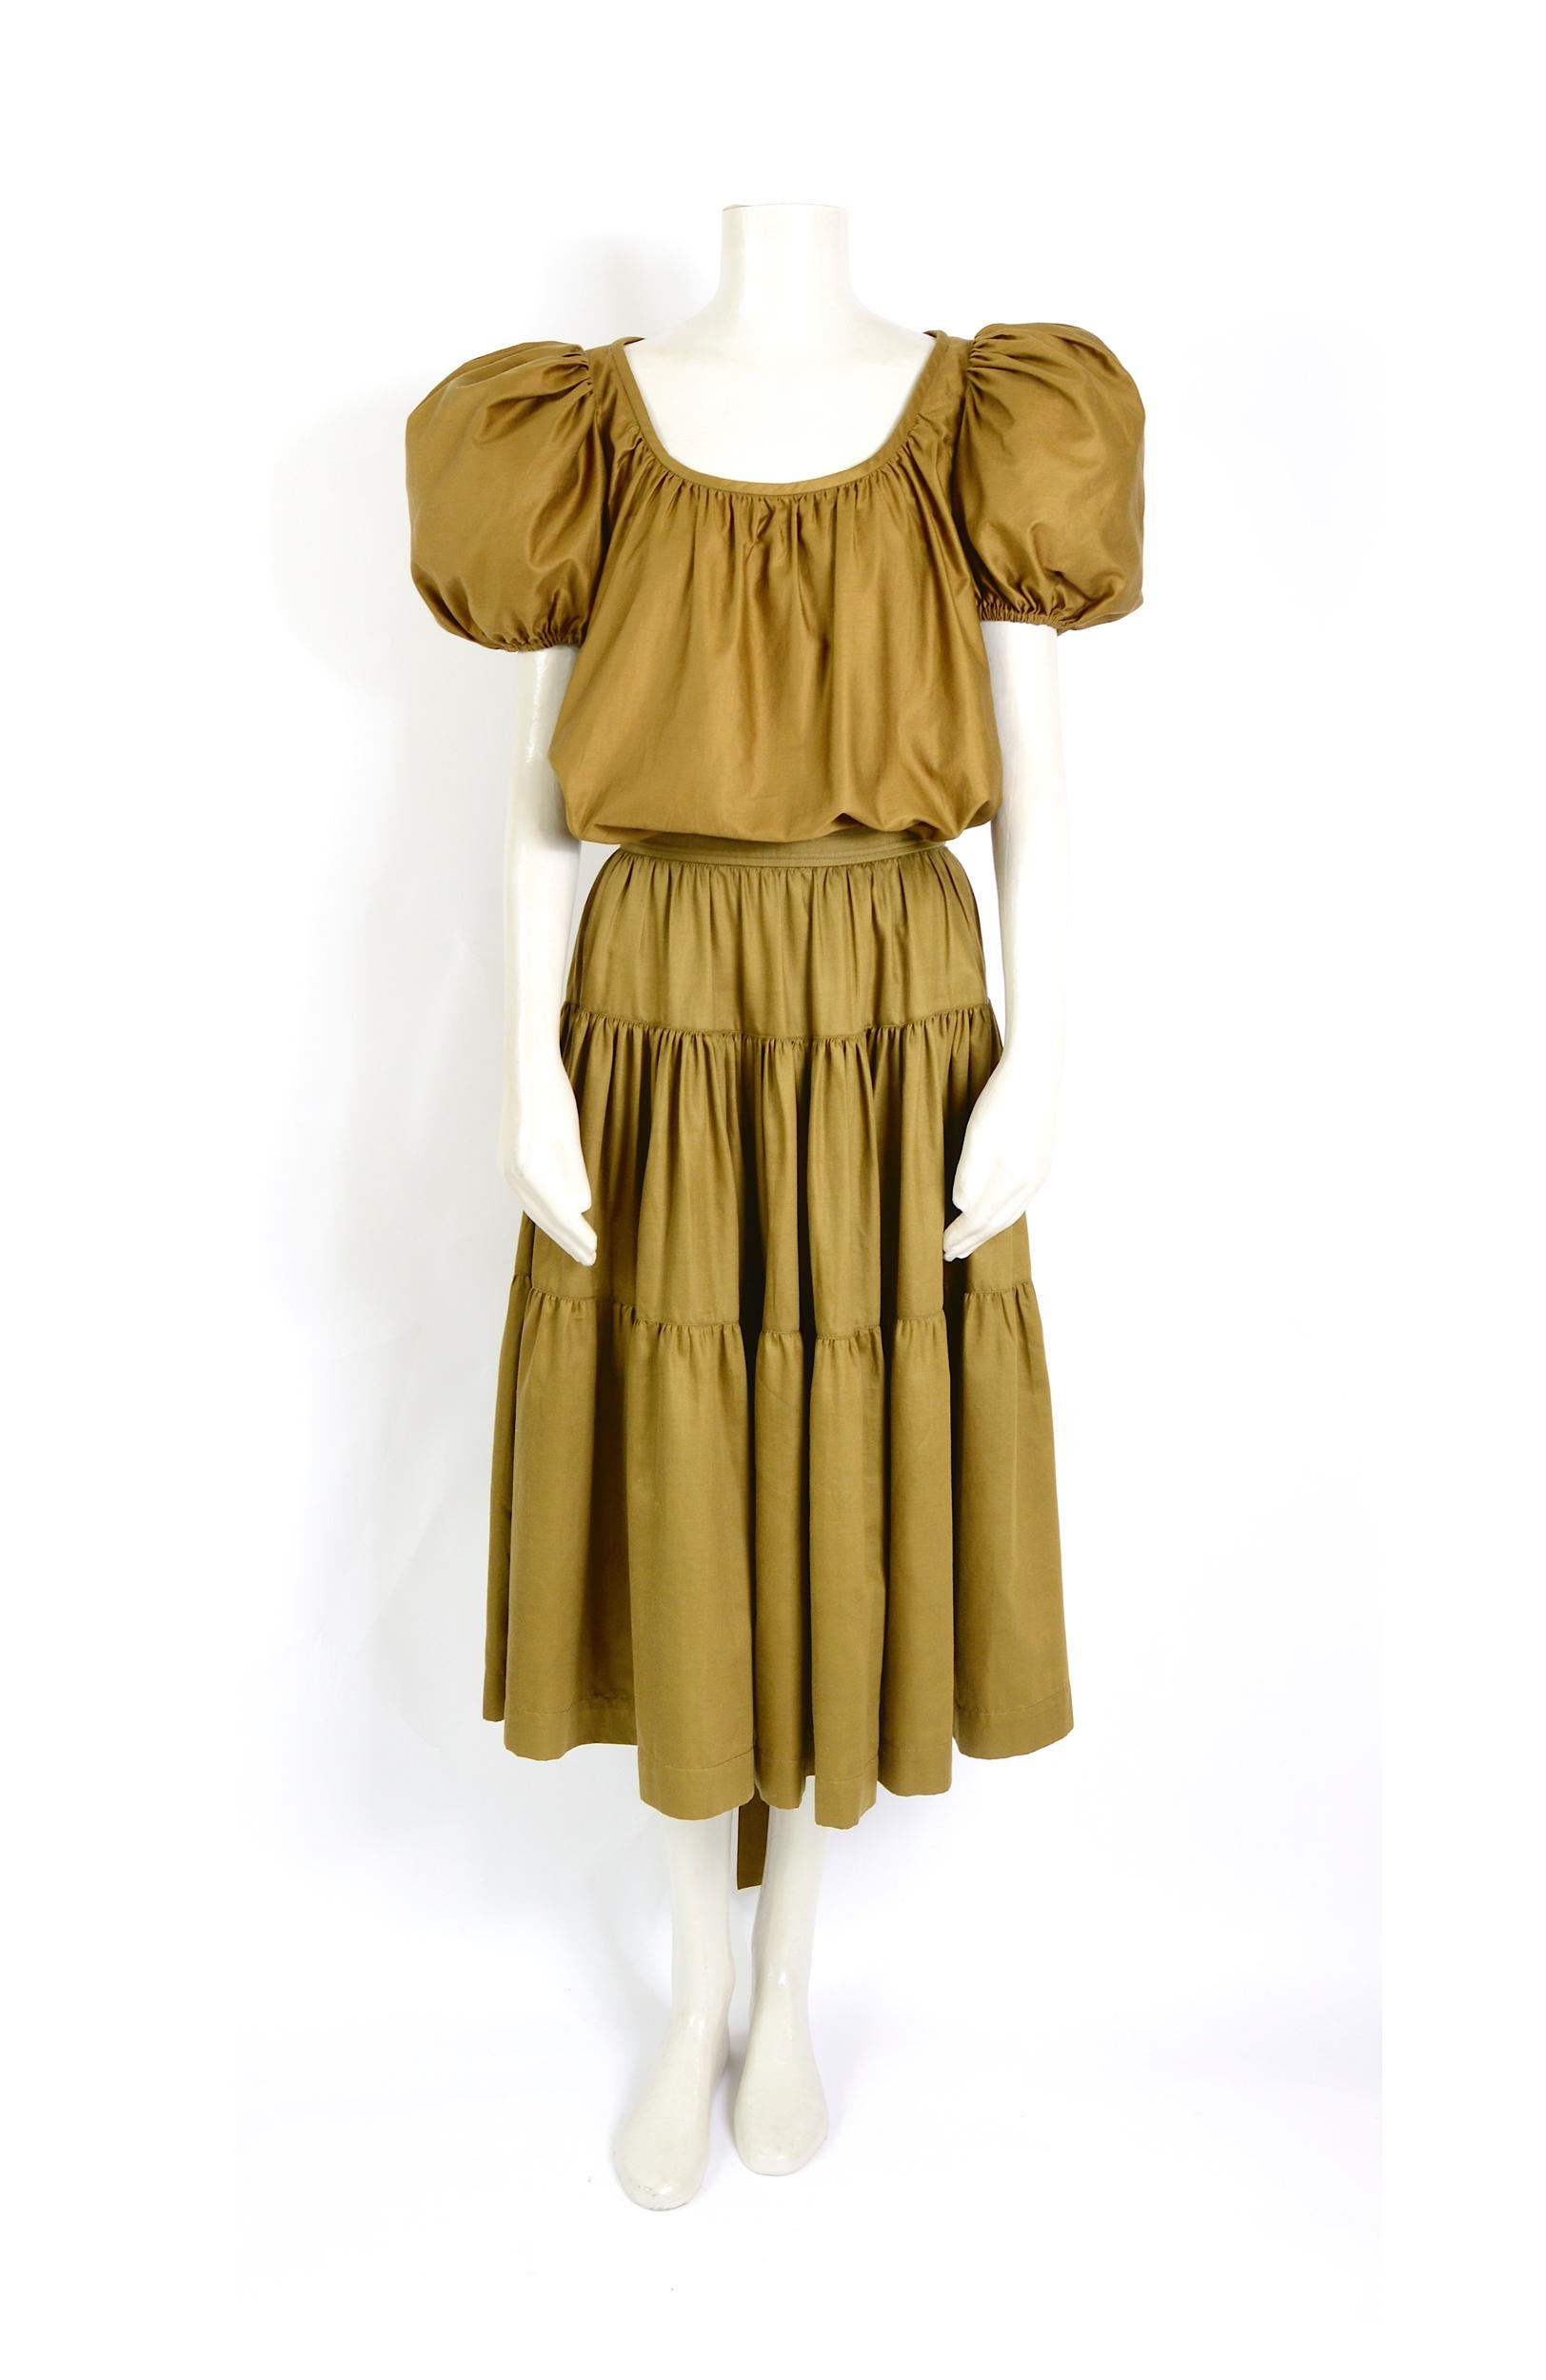 This beautiful collectible iconic vintage 1970s blouse and skirt set by Yves Saint Laurent clearly illustrates Yves Saint Laurent's love and fascination for all things gypsy and bohemian.
The unlined skirt and top plus a tie sash belt are made in